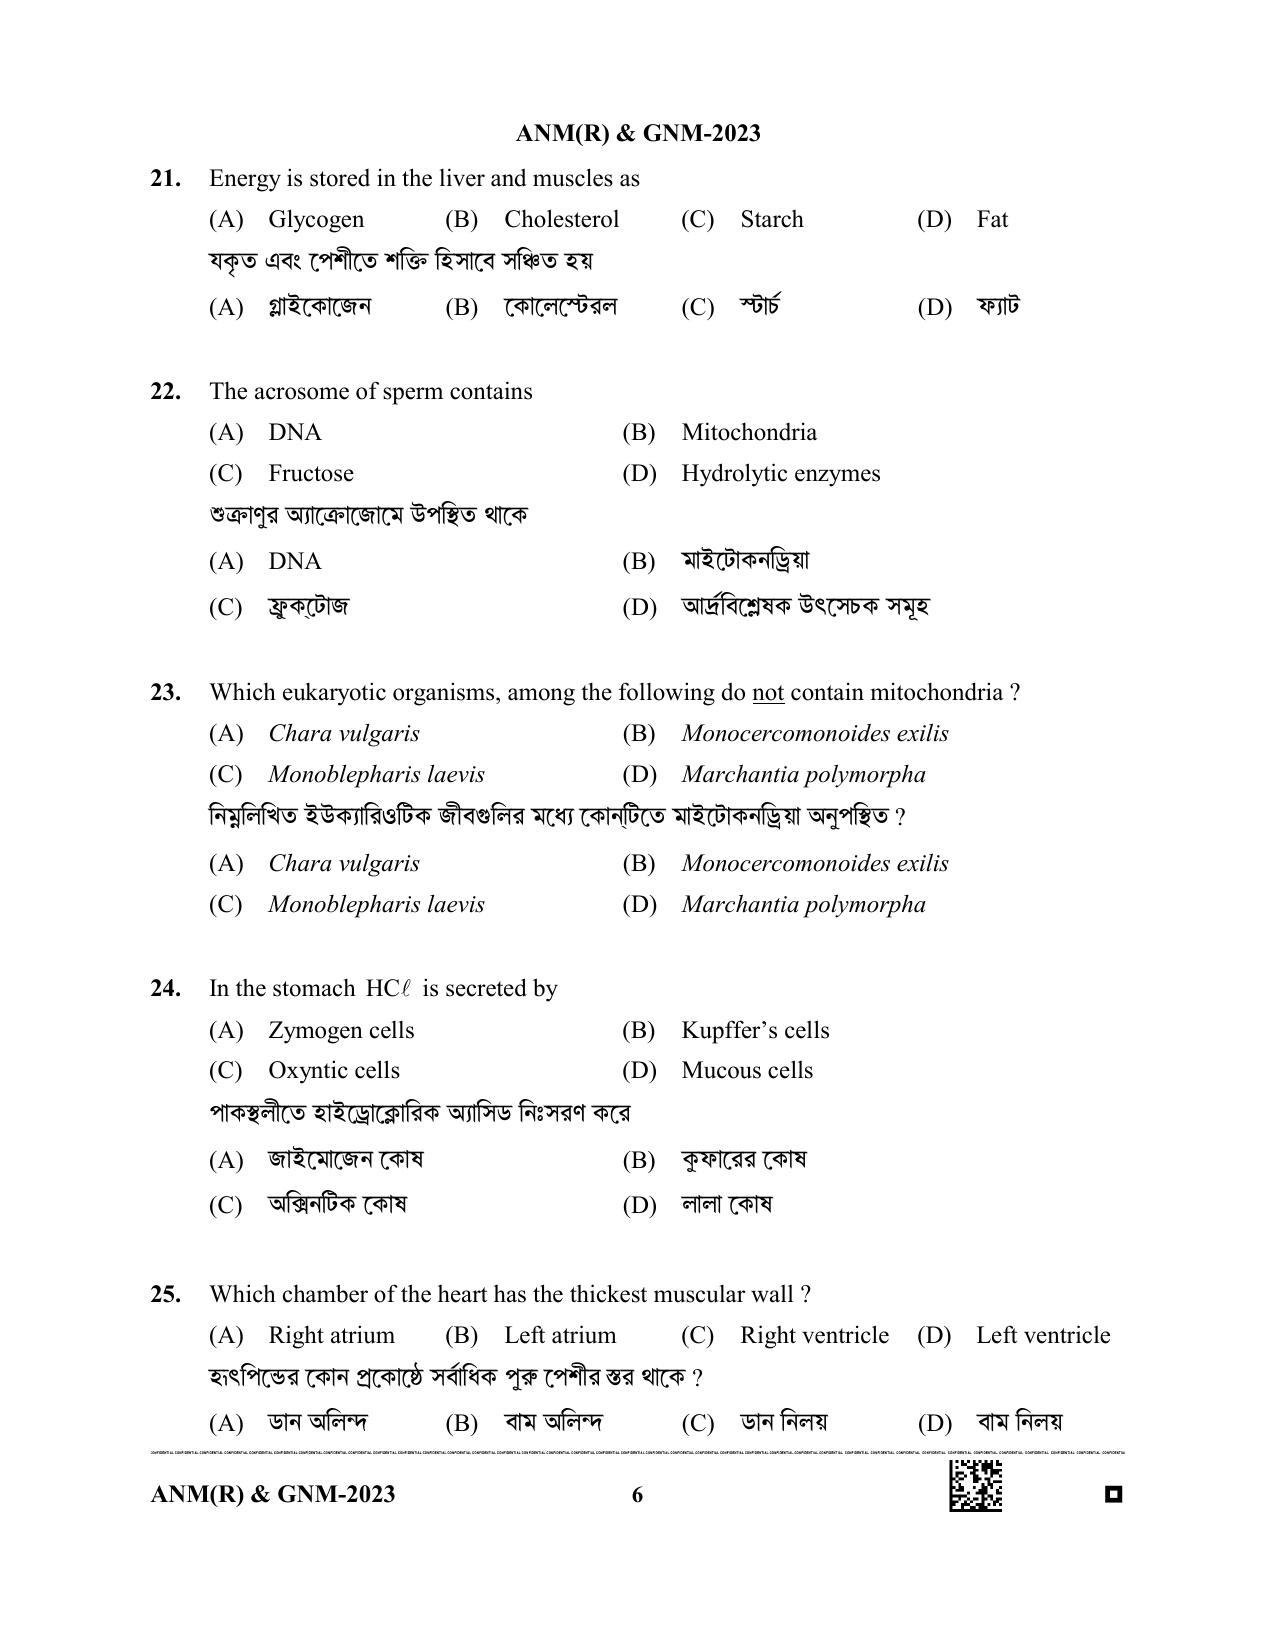 WB ANM GNM 2023 Question Paper - Page 6